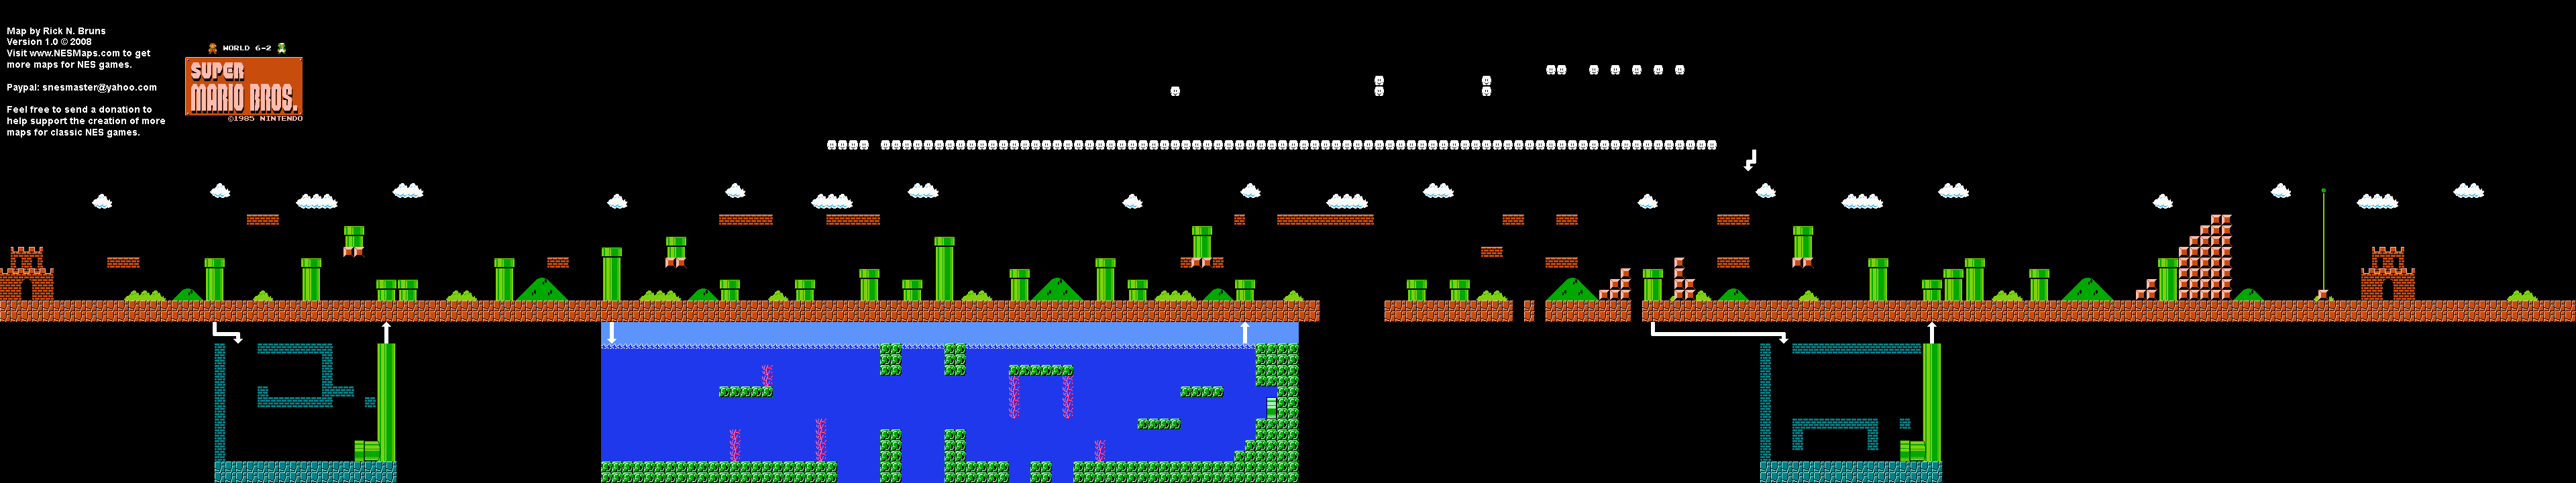 Super Mario Brothers - World 6-2 Nintendo NES Background Only Map